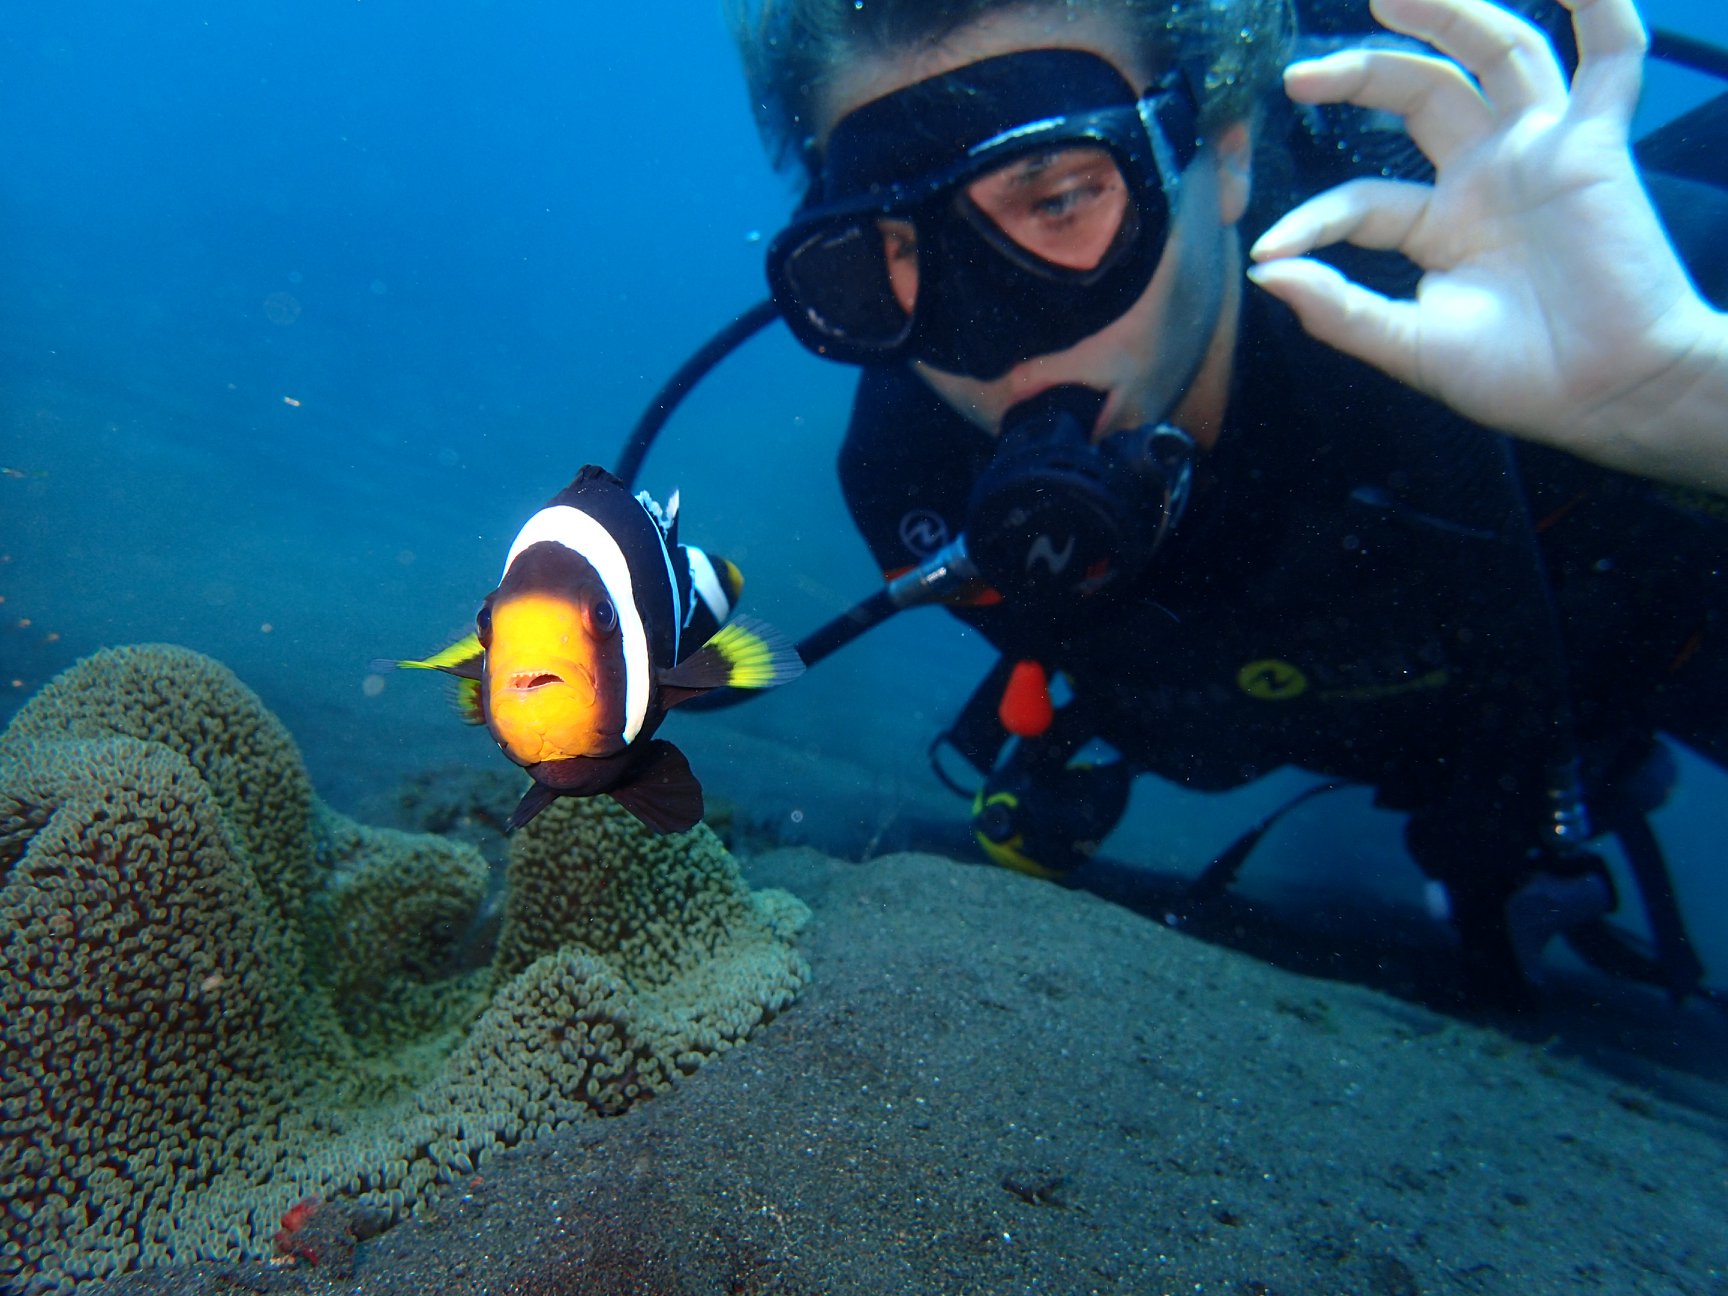 Clarks anemonefish and a diver